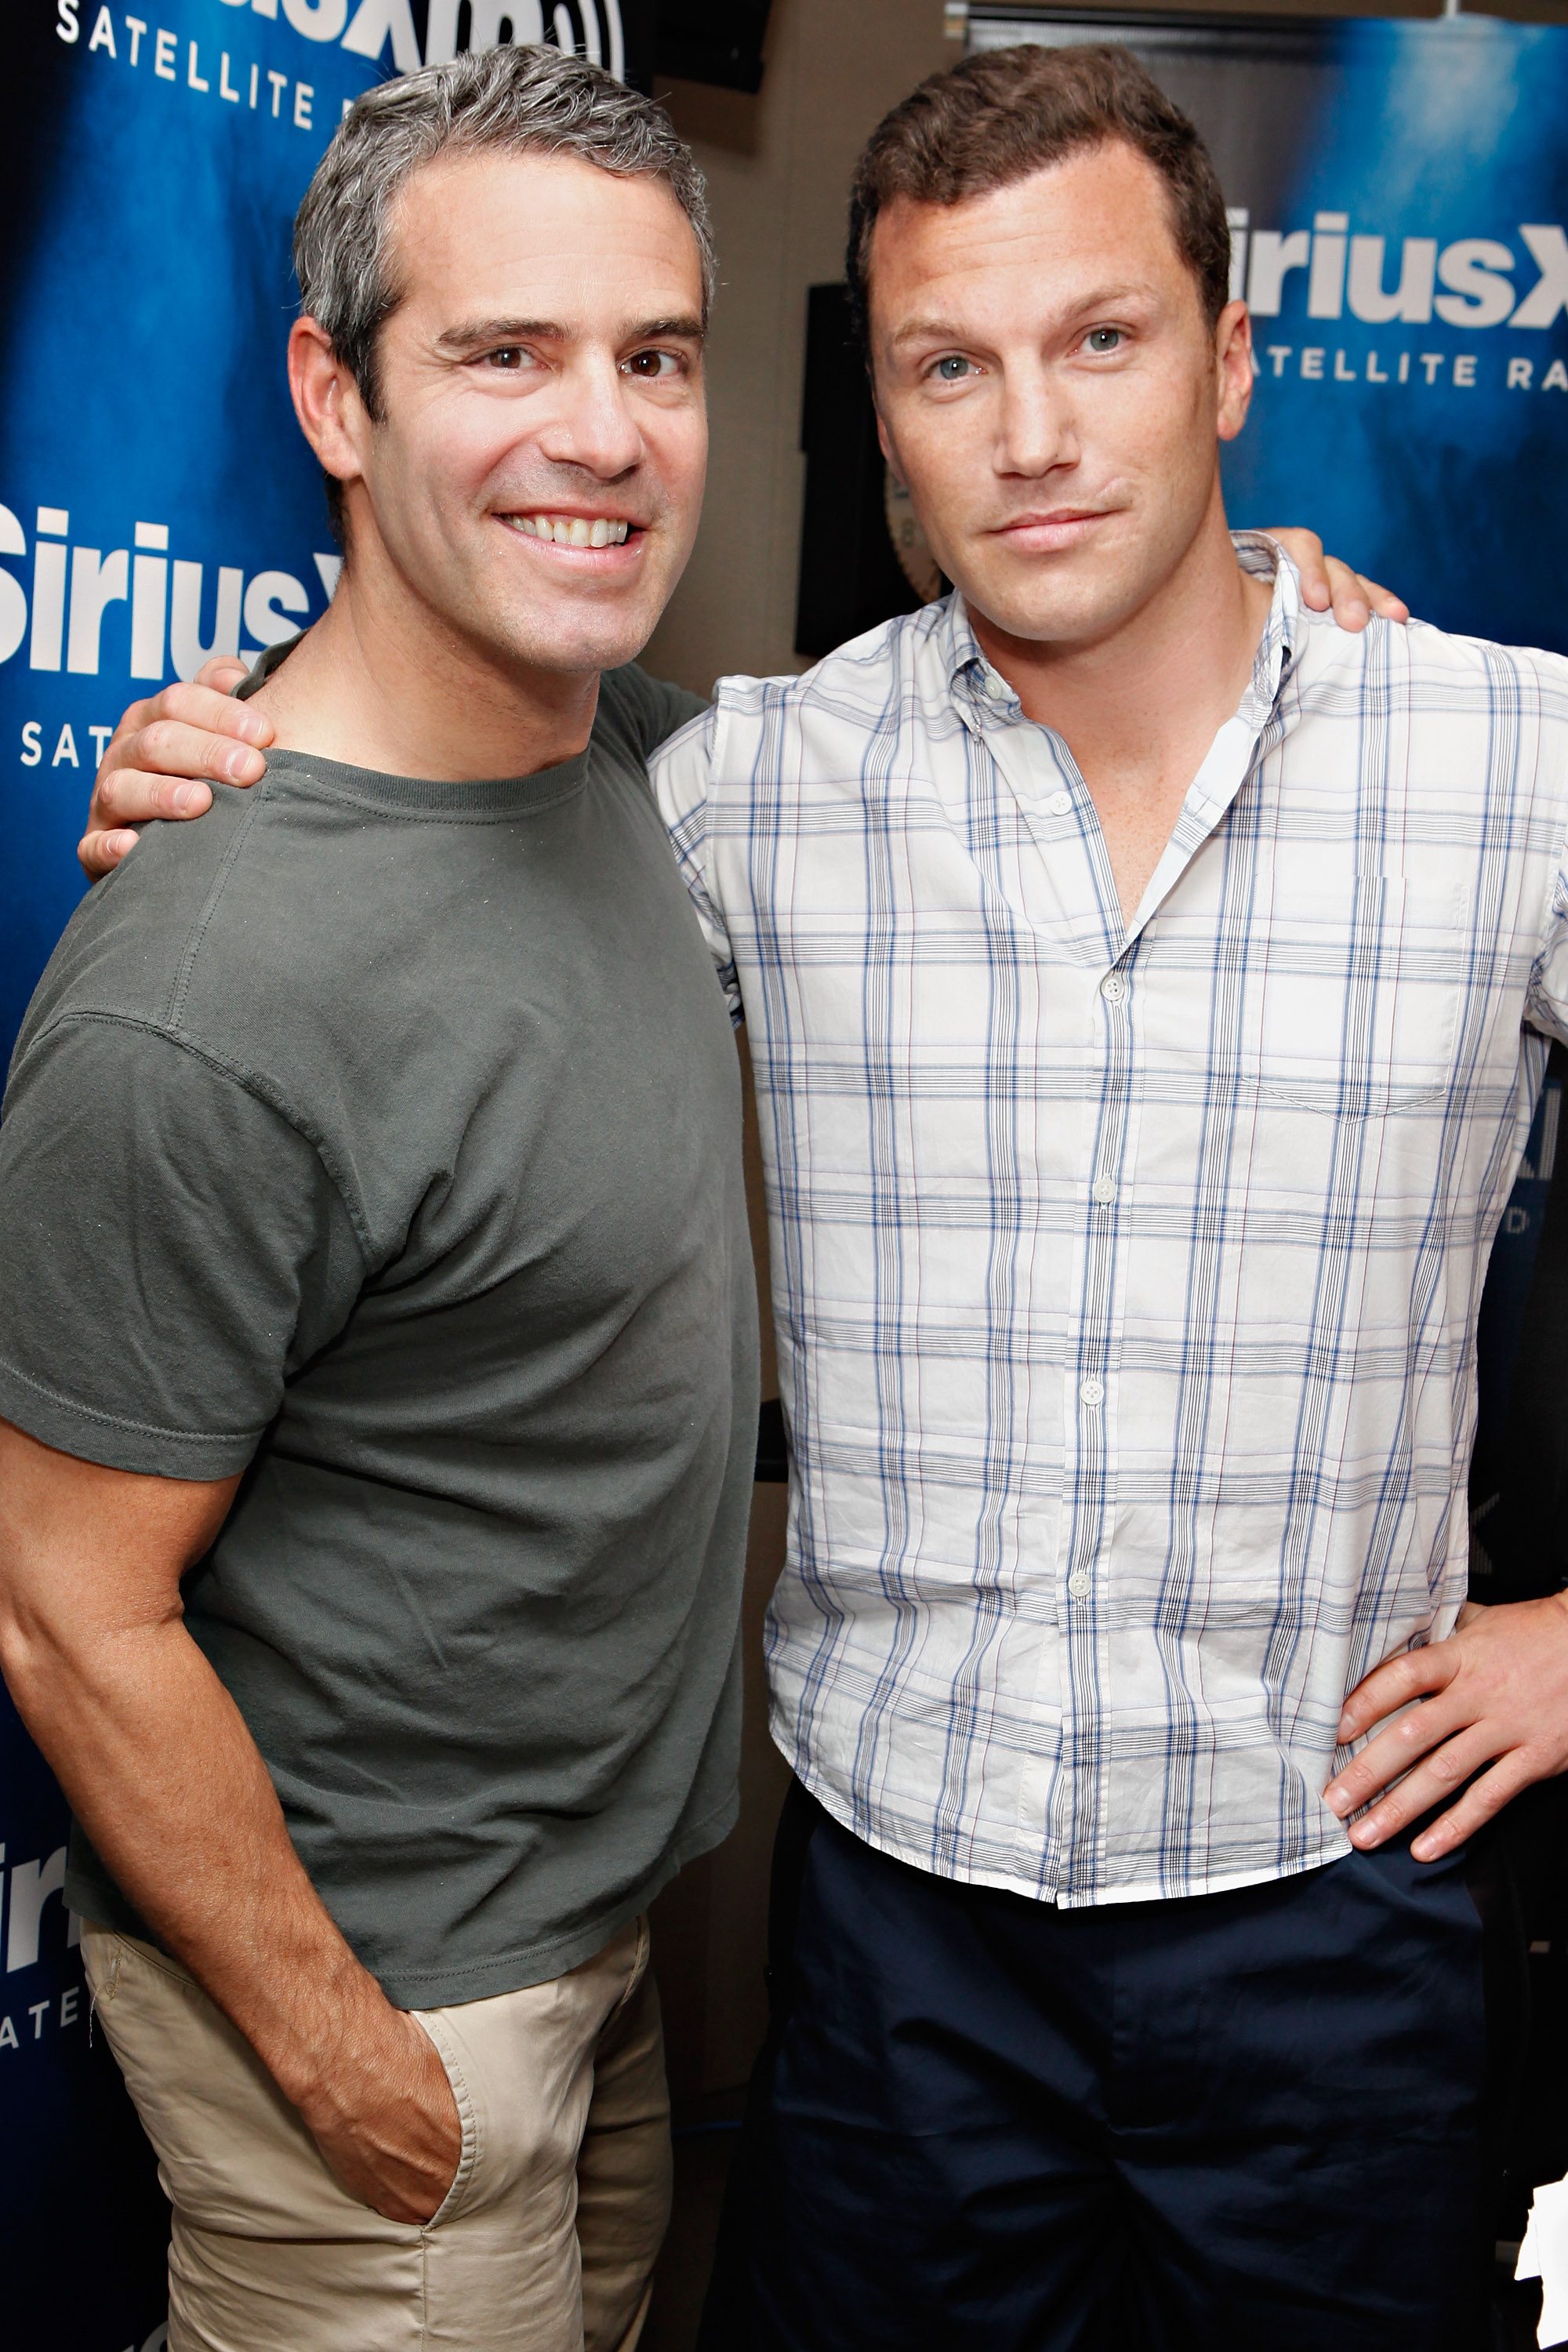 Andy Cohen and Sean Avery prior to his show “Andy Cohen is Most Talkative” at the SiriusXM Studio on June 21, 2012, in New York City | Source: Getty Images